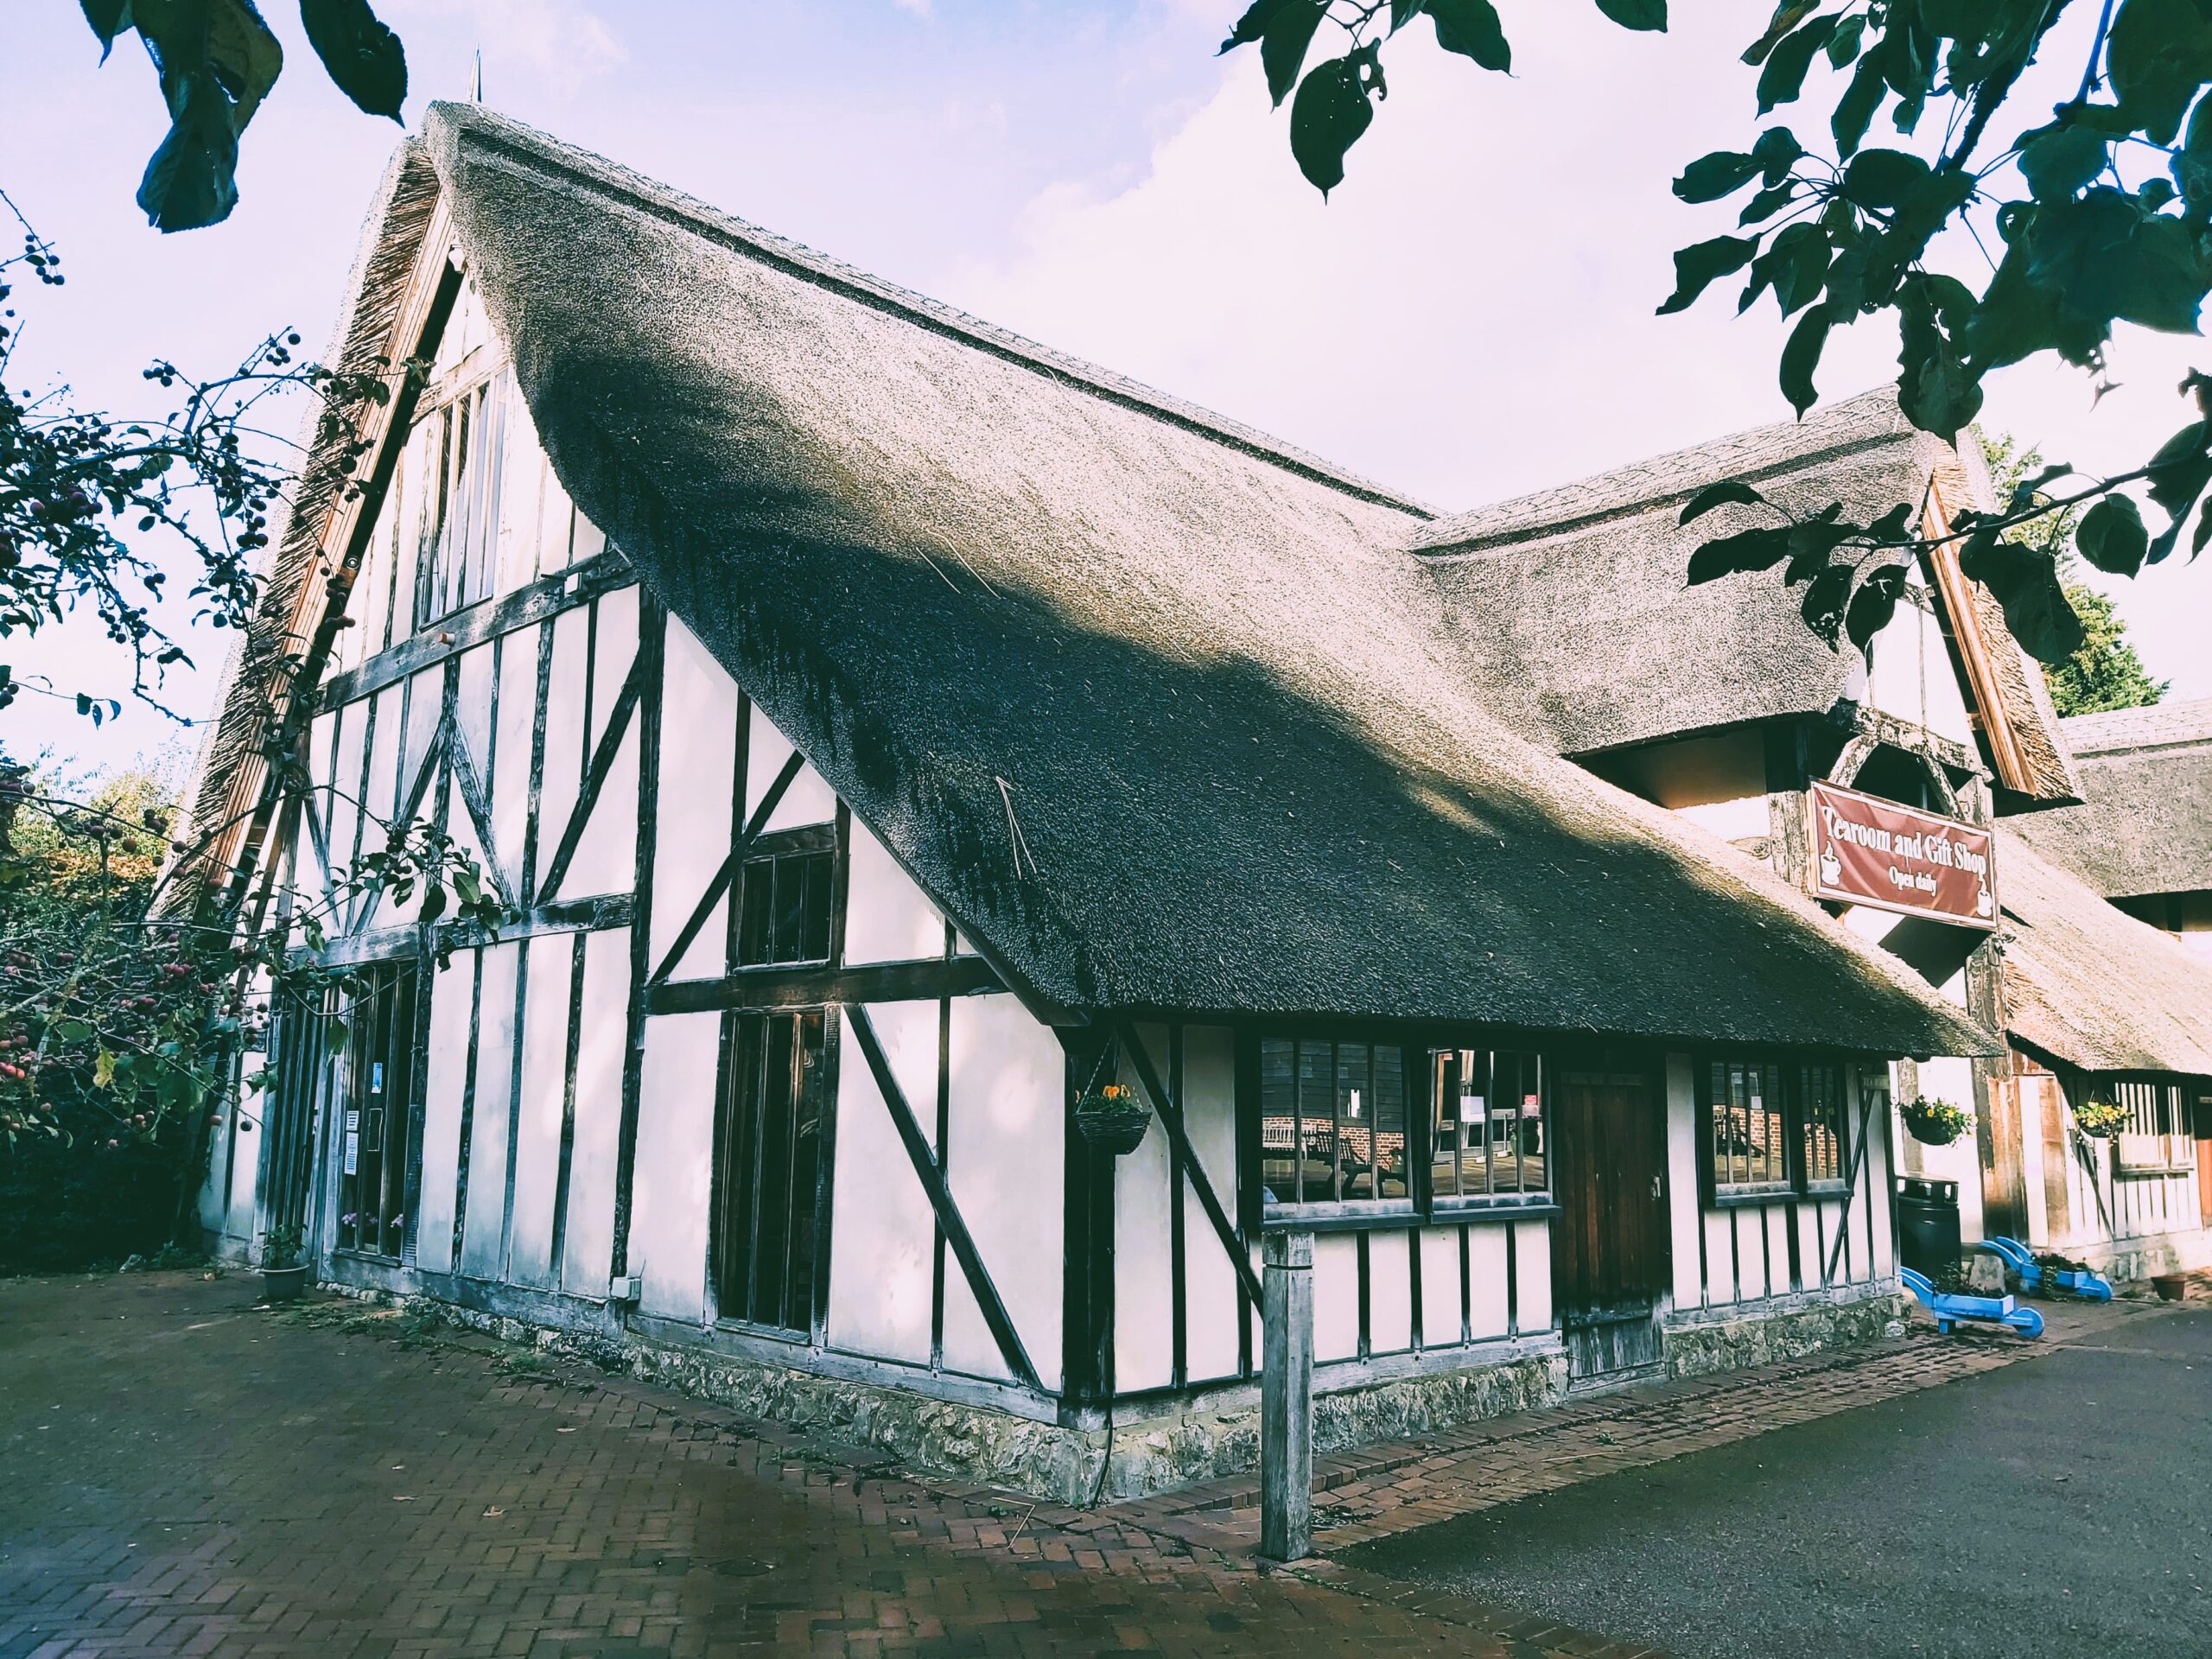 Thatched roof barn at The Friars Aylesford Priory, Kent, England